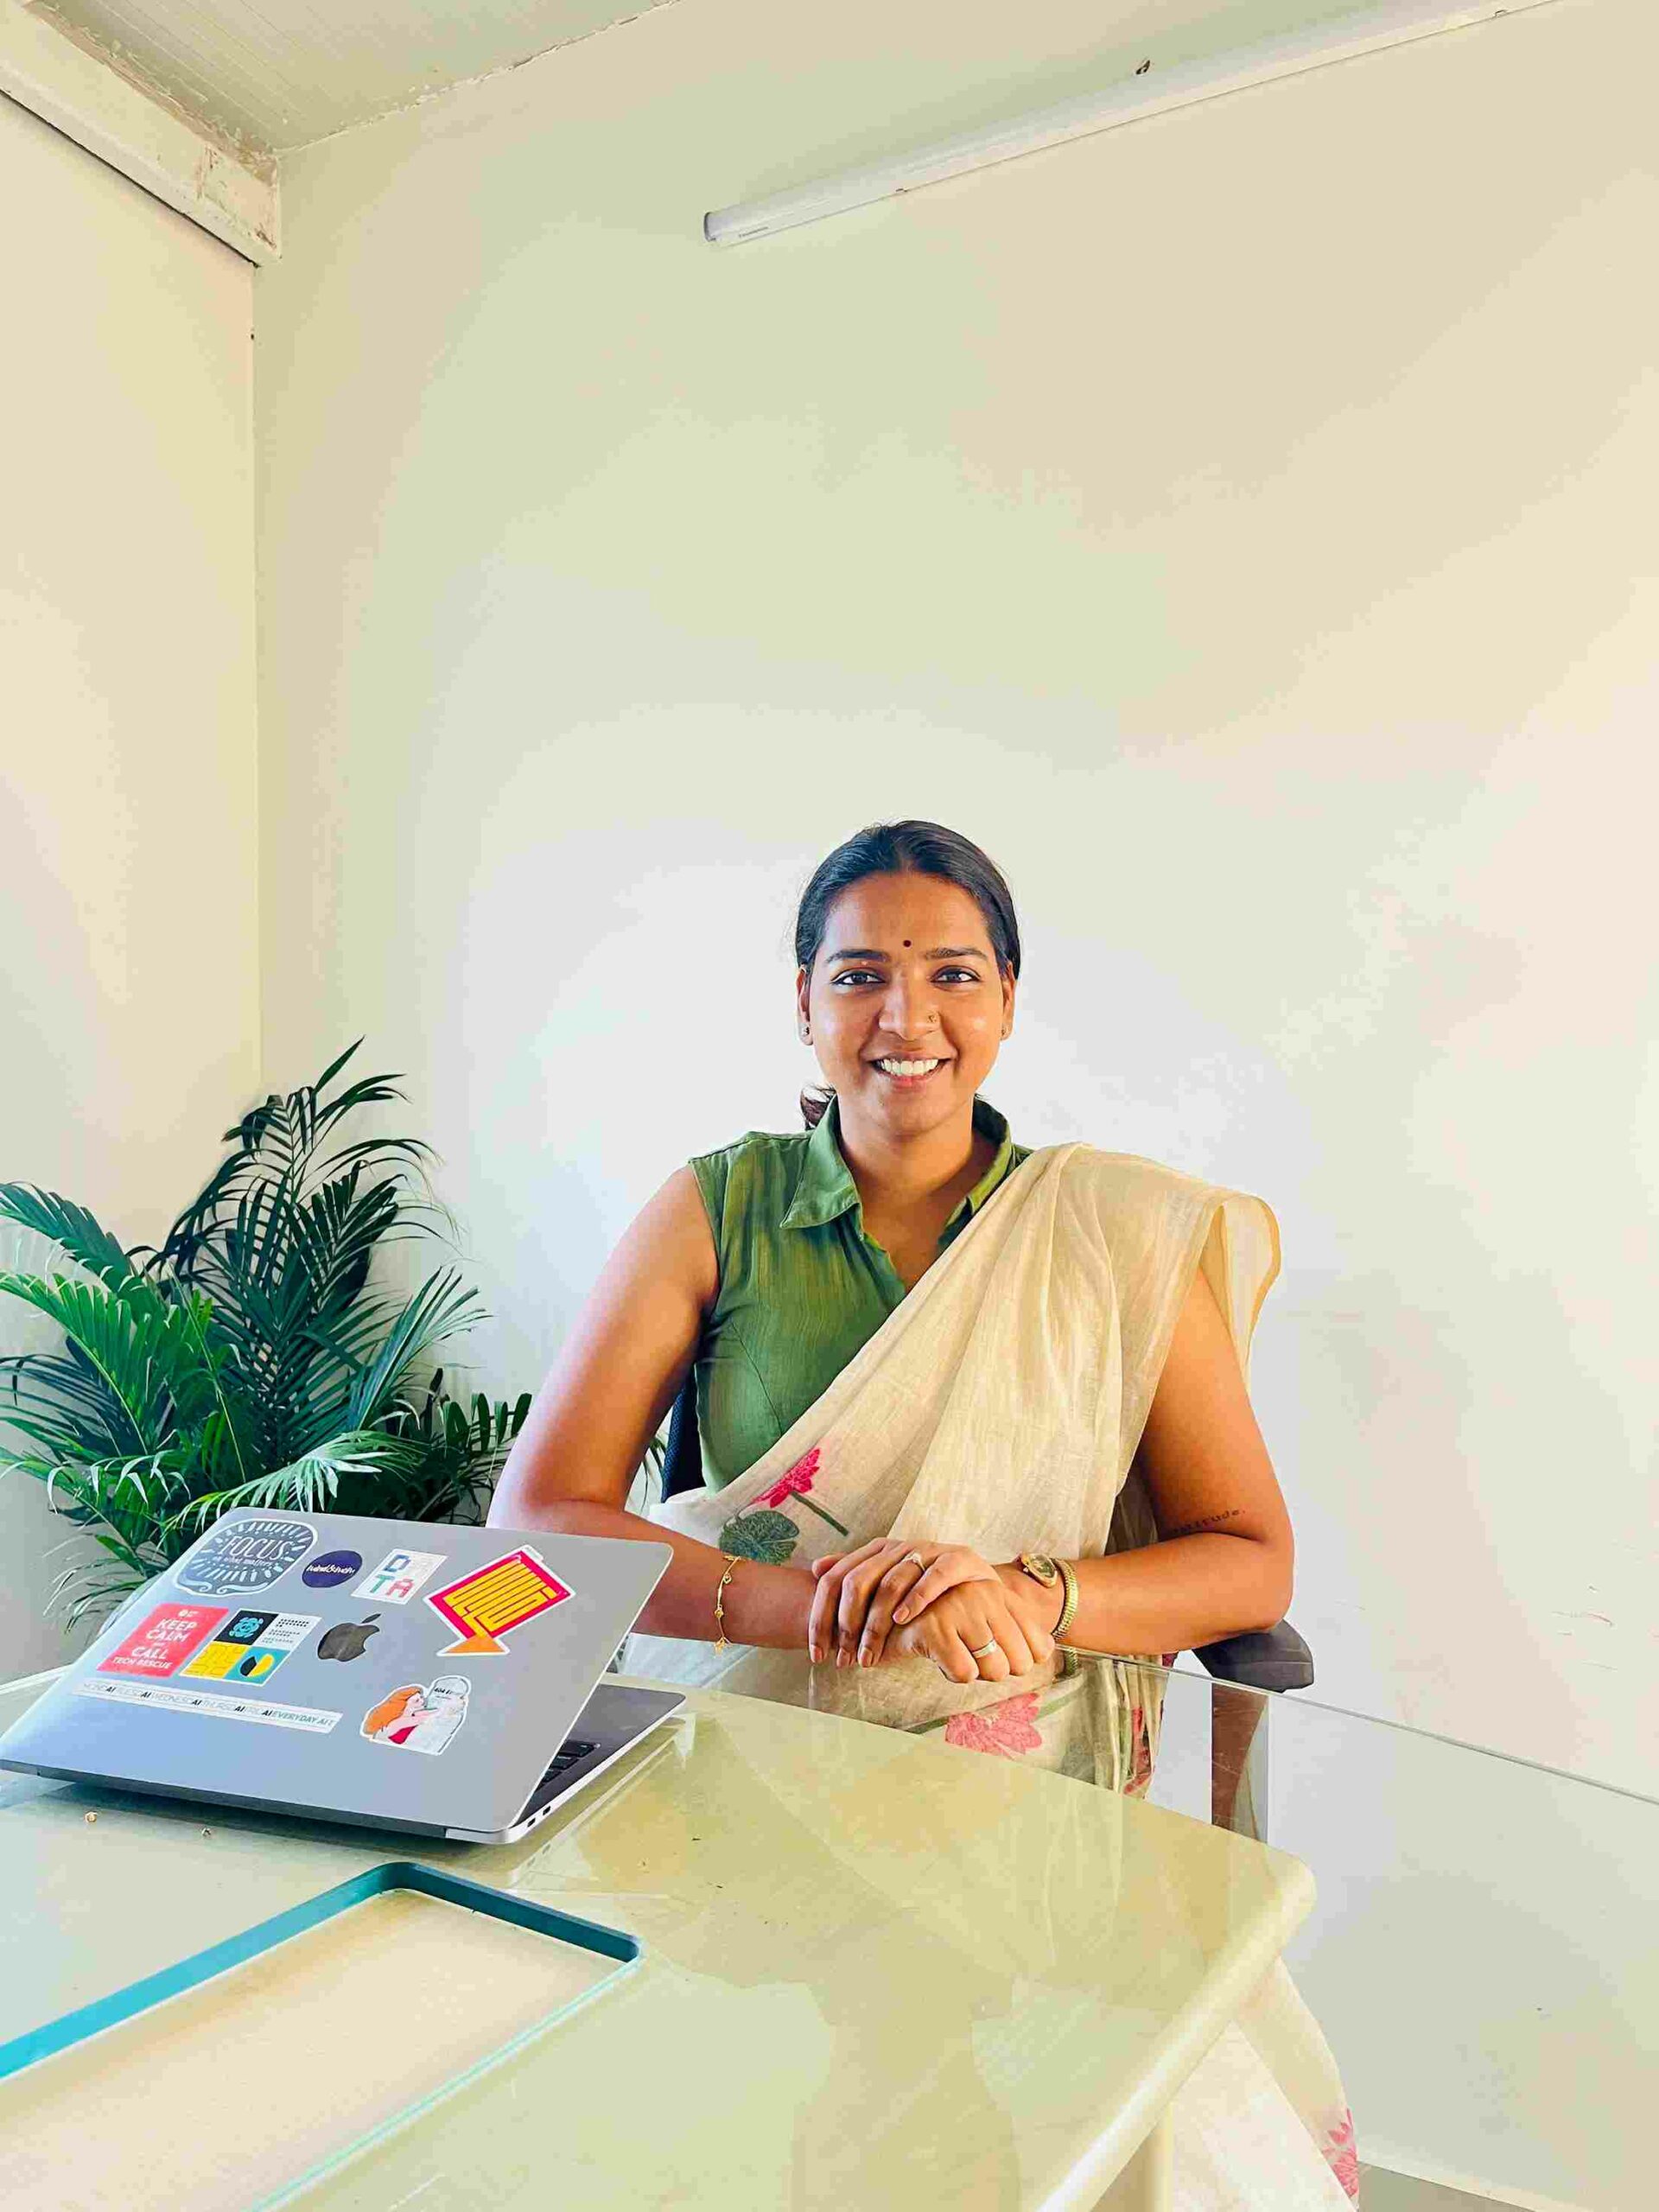 Padmini notes lifestyle changes often help women get pregnant without any external intervention